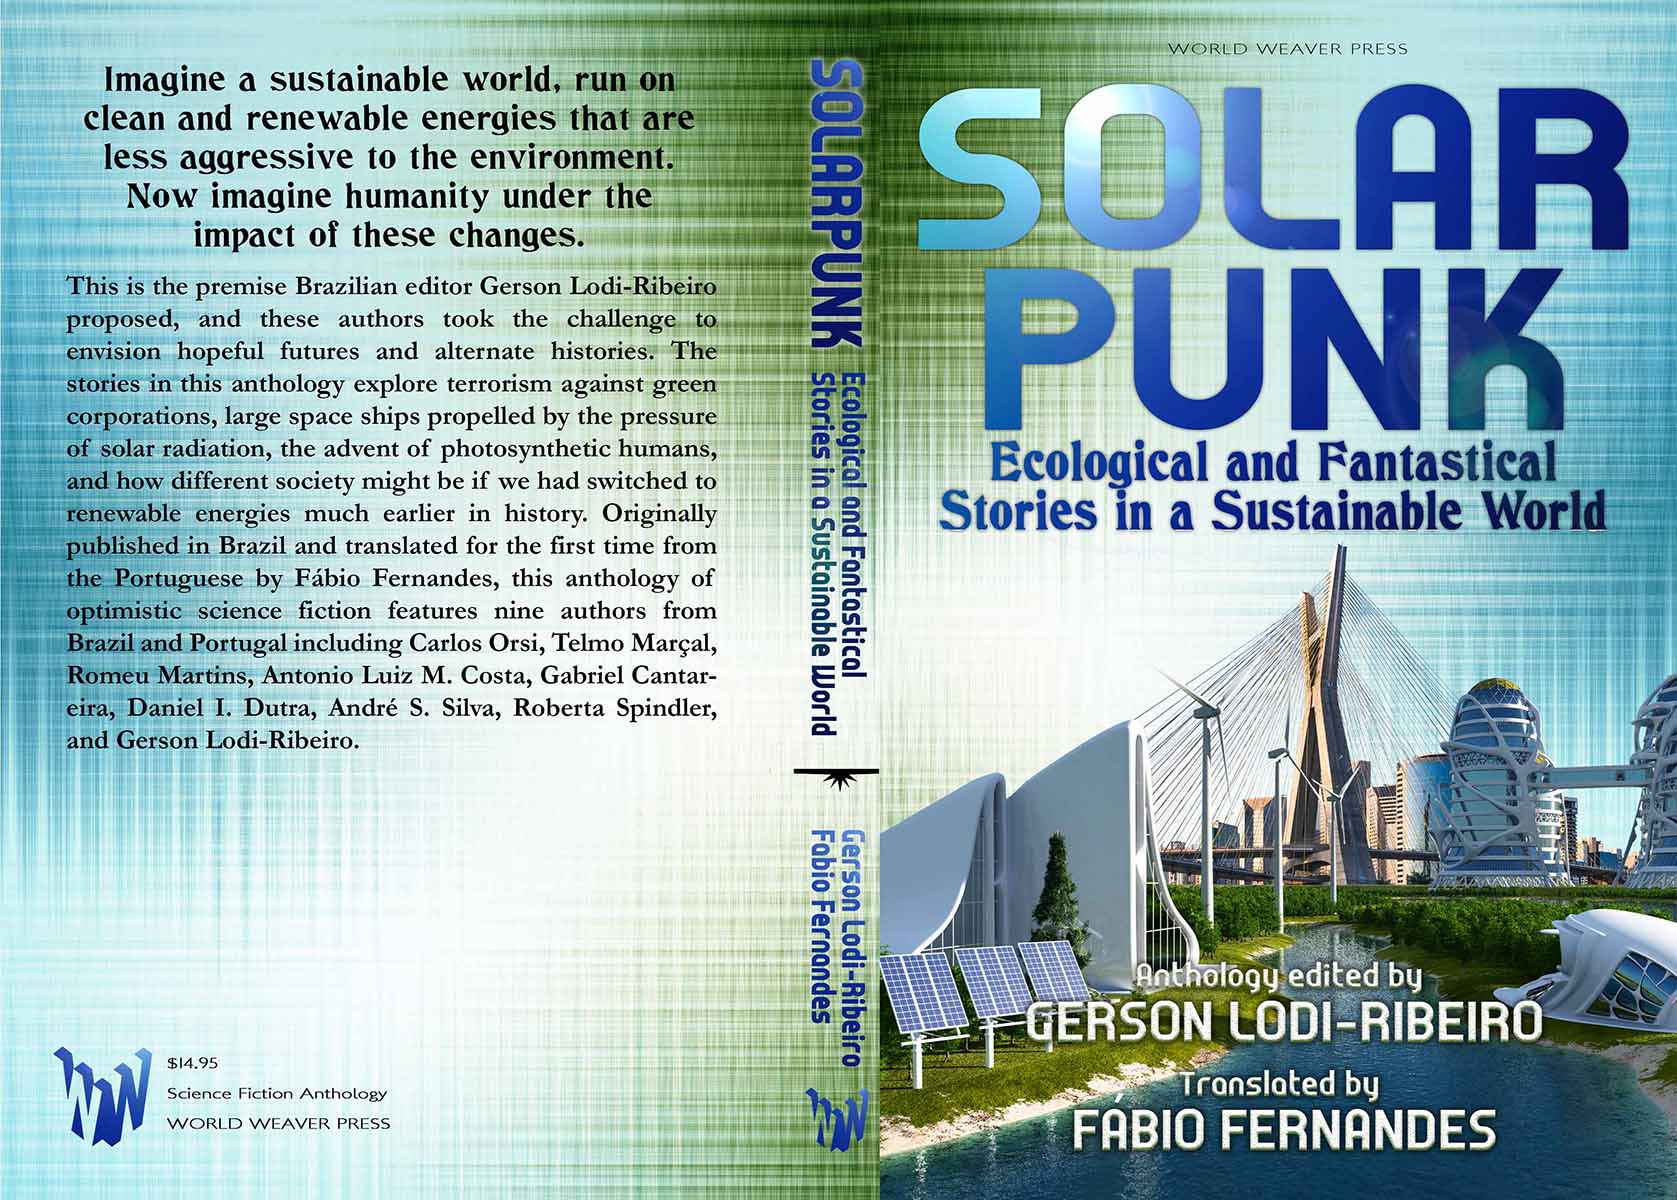 Solarpunk: Ecological and Fantastical Stories in a Sustainable World